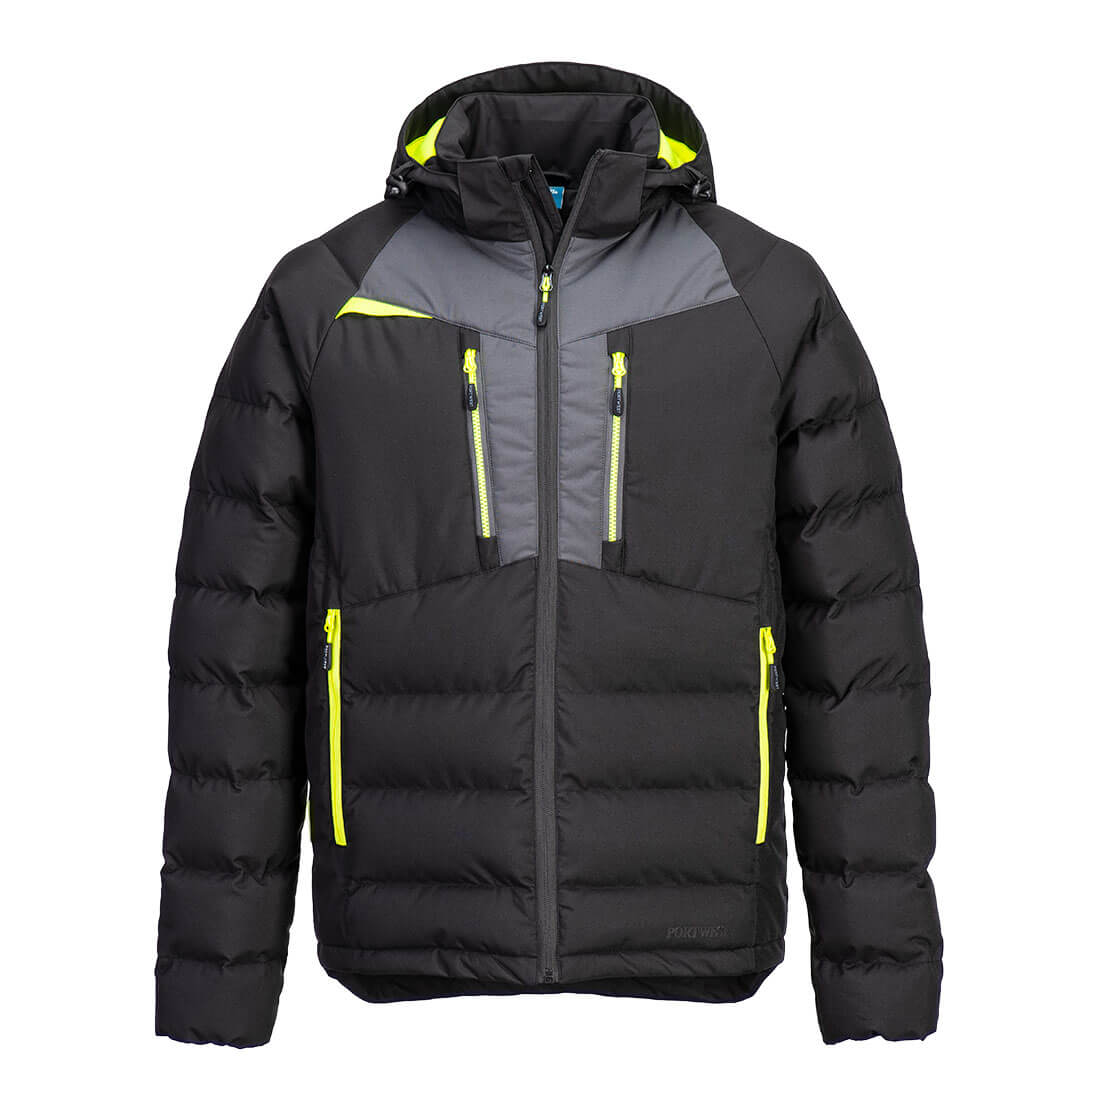 DX4 Insulated Jacket